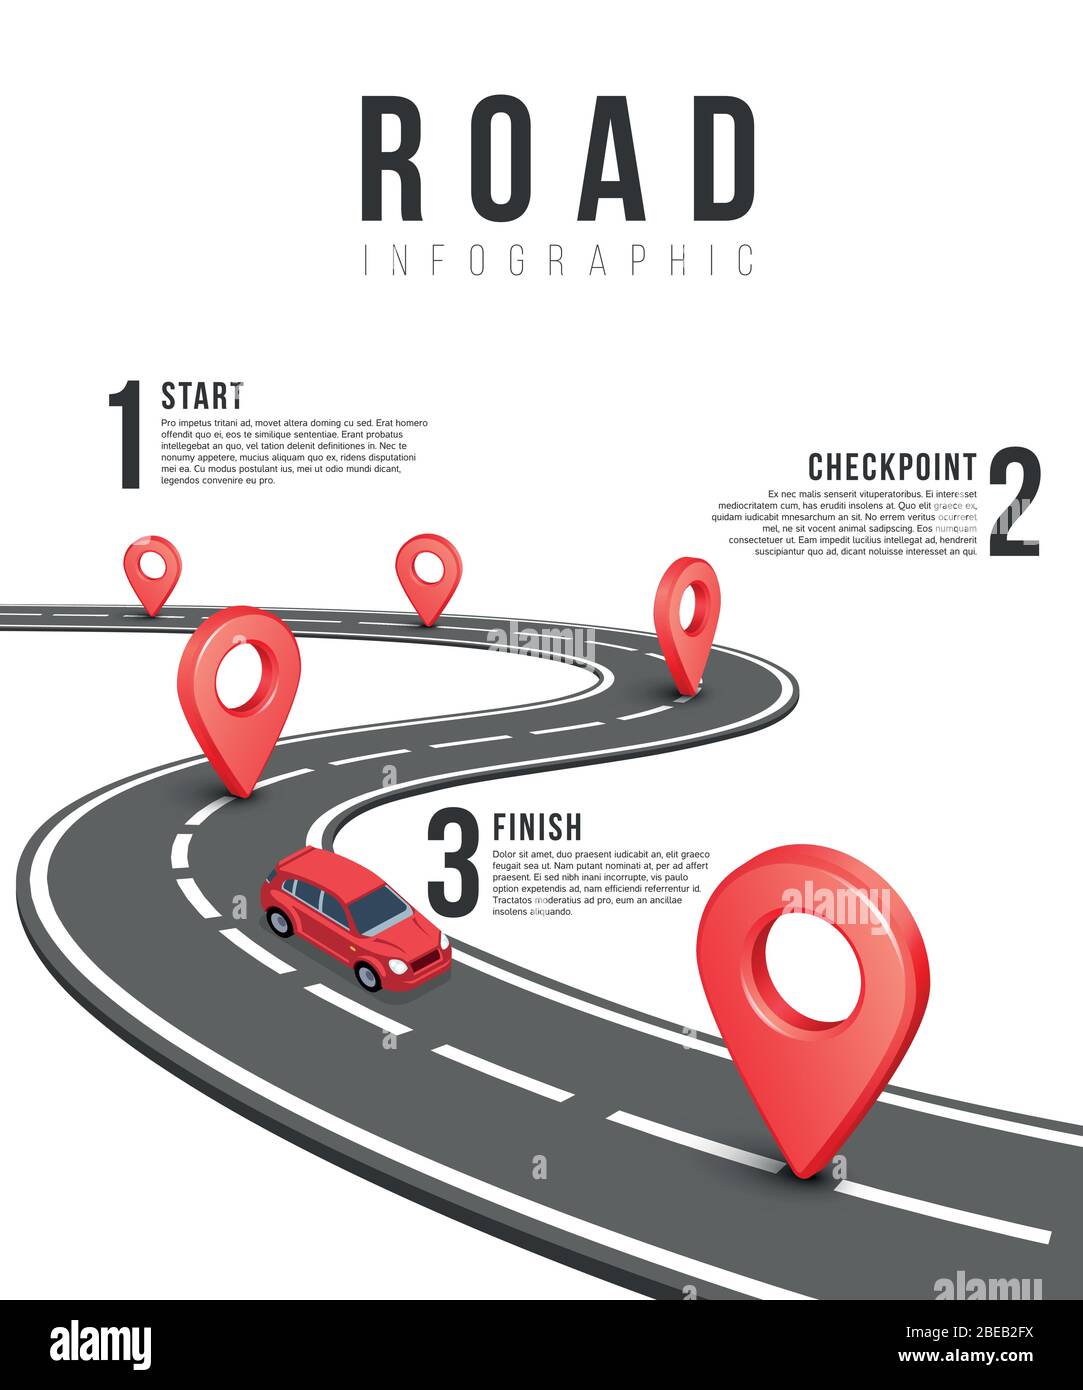 Road infographic vector template with red isometric car. Business road infographic start finish and checkpoint illustration Stock Vector